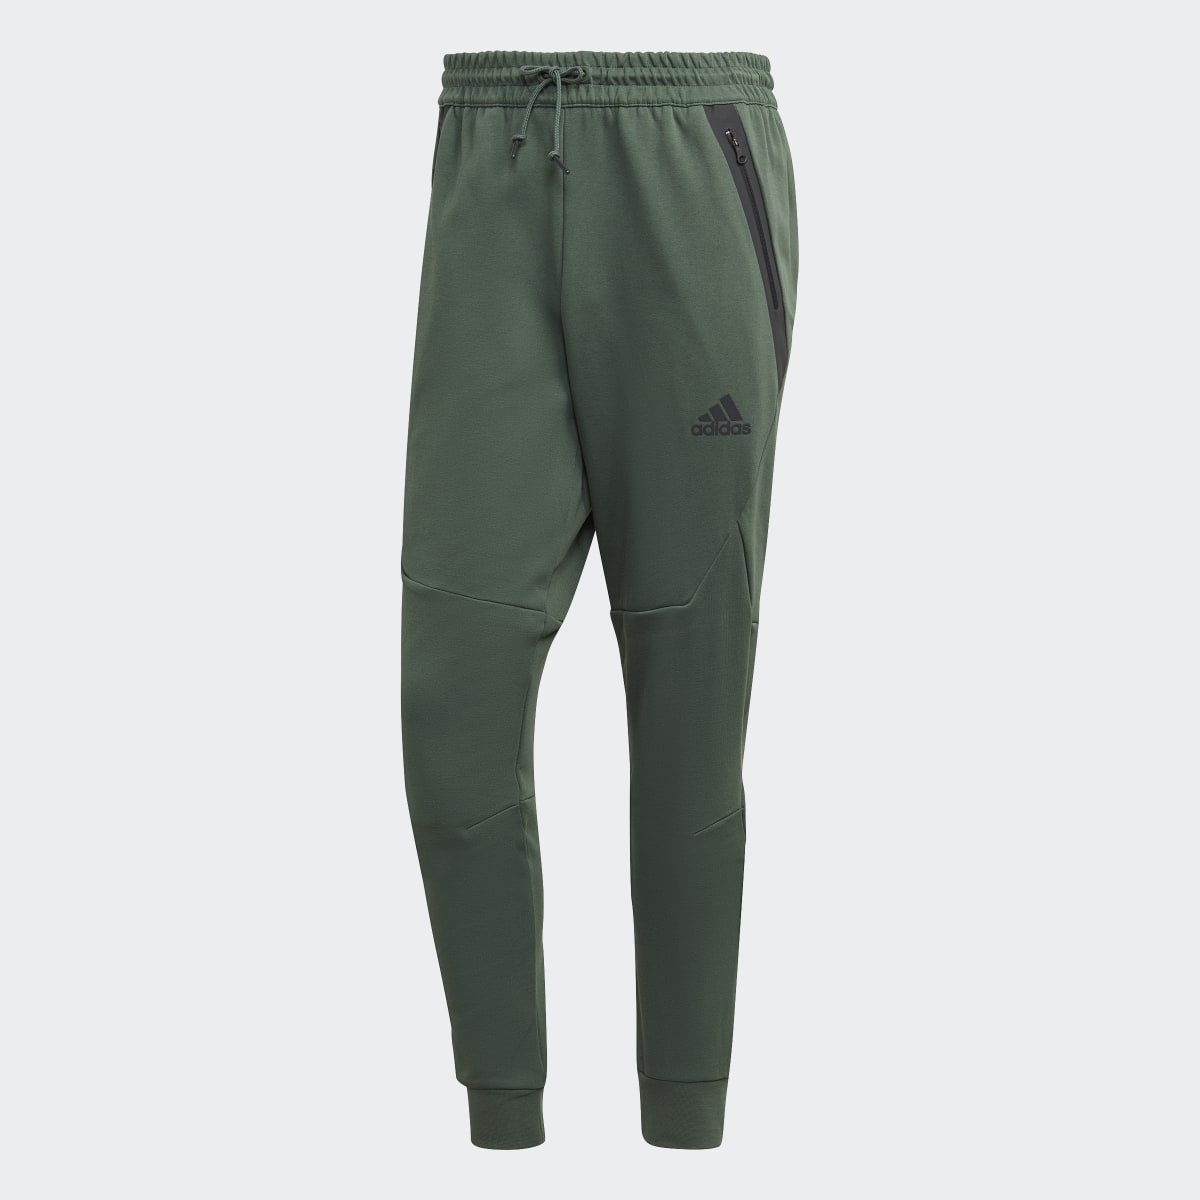 Adidas Designed for Gameday Joggers. 4